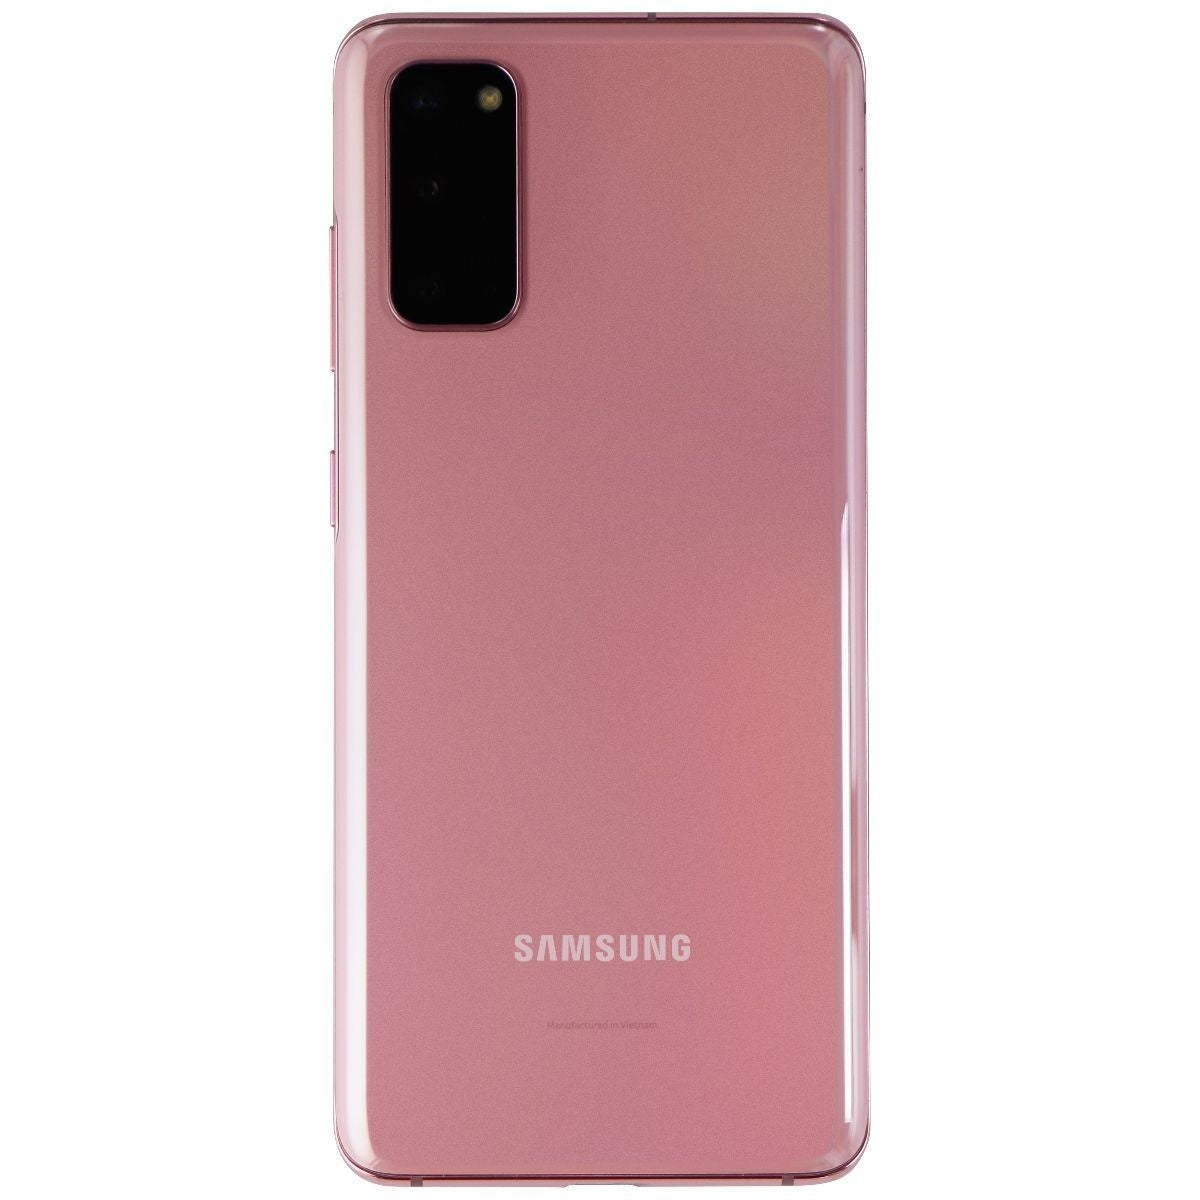 Samsung Galaxy S20 5G (6.2-in) (SM-G981U1) UNLOCKED - 128GB/Cloud Pink Cell Phones & Smartphones Samsung    - Simple Cell Bulk Wholesale Pricing - USA Seller